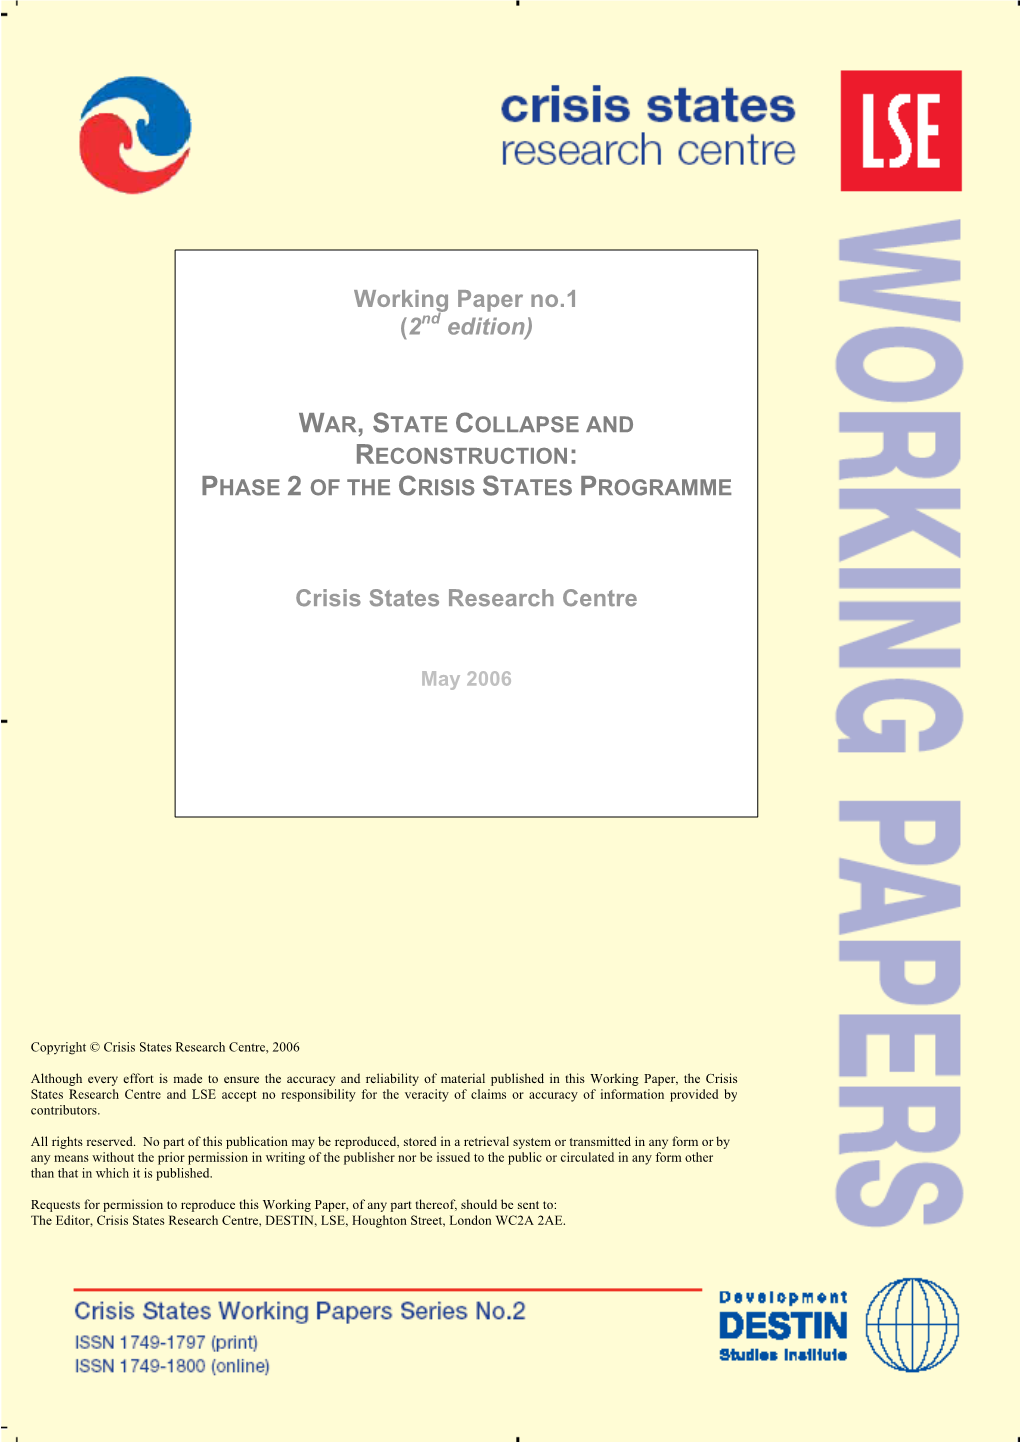 War, State Collapse and Reconstruction: Phase 2 of the Crisis States Programme